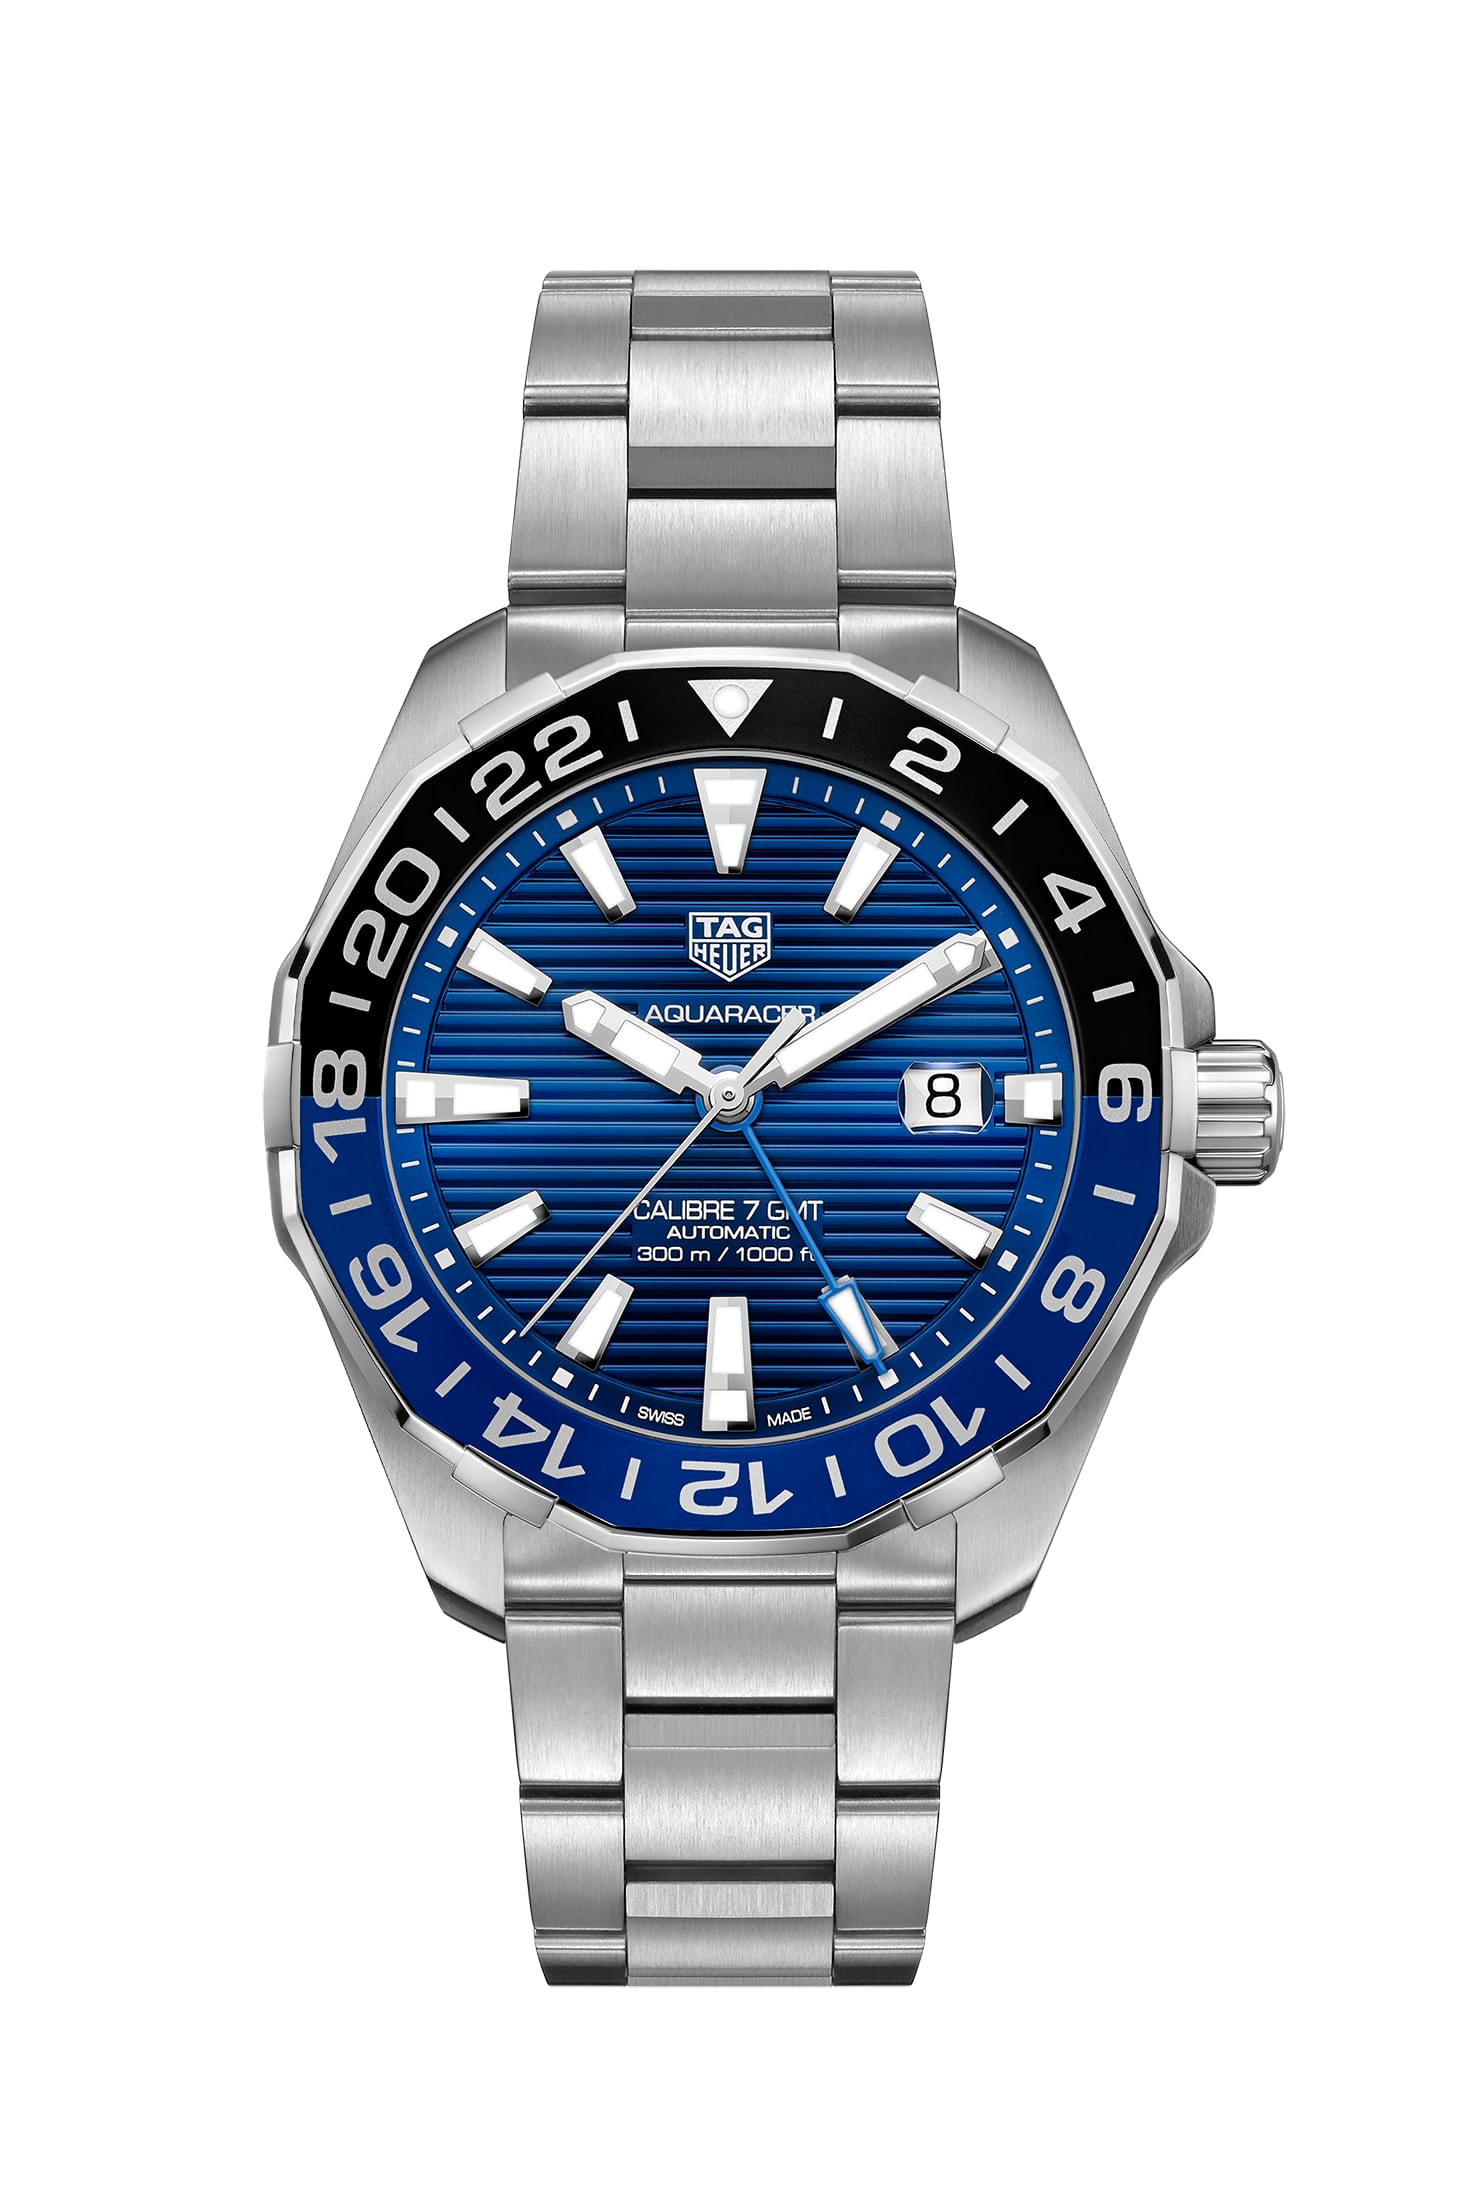 INTRODUCING: The TAG Heuer Aquaracer GMT with black and blue bezel